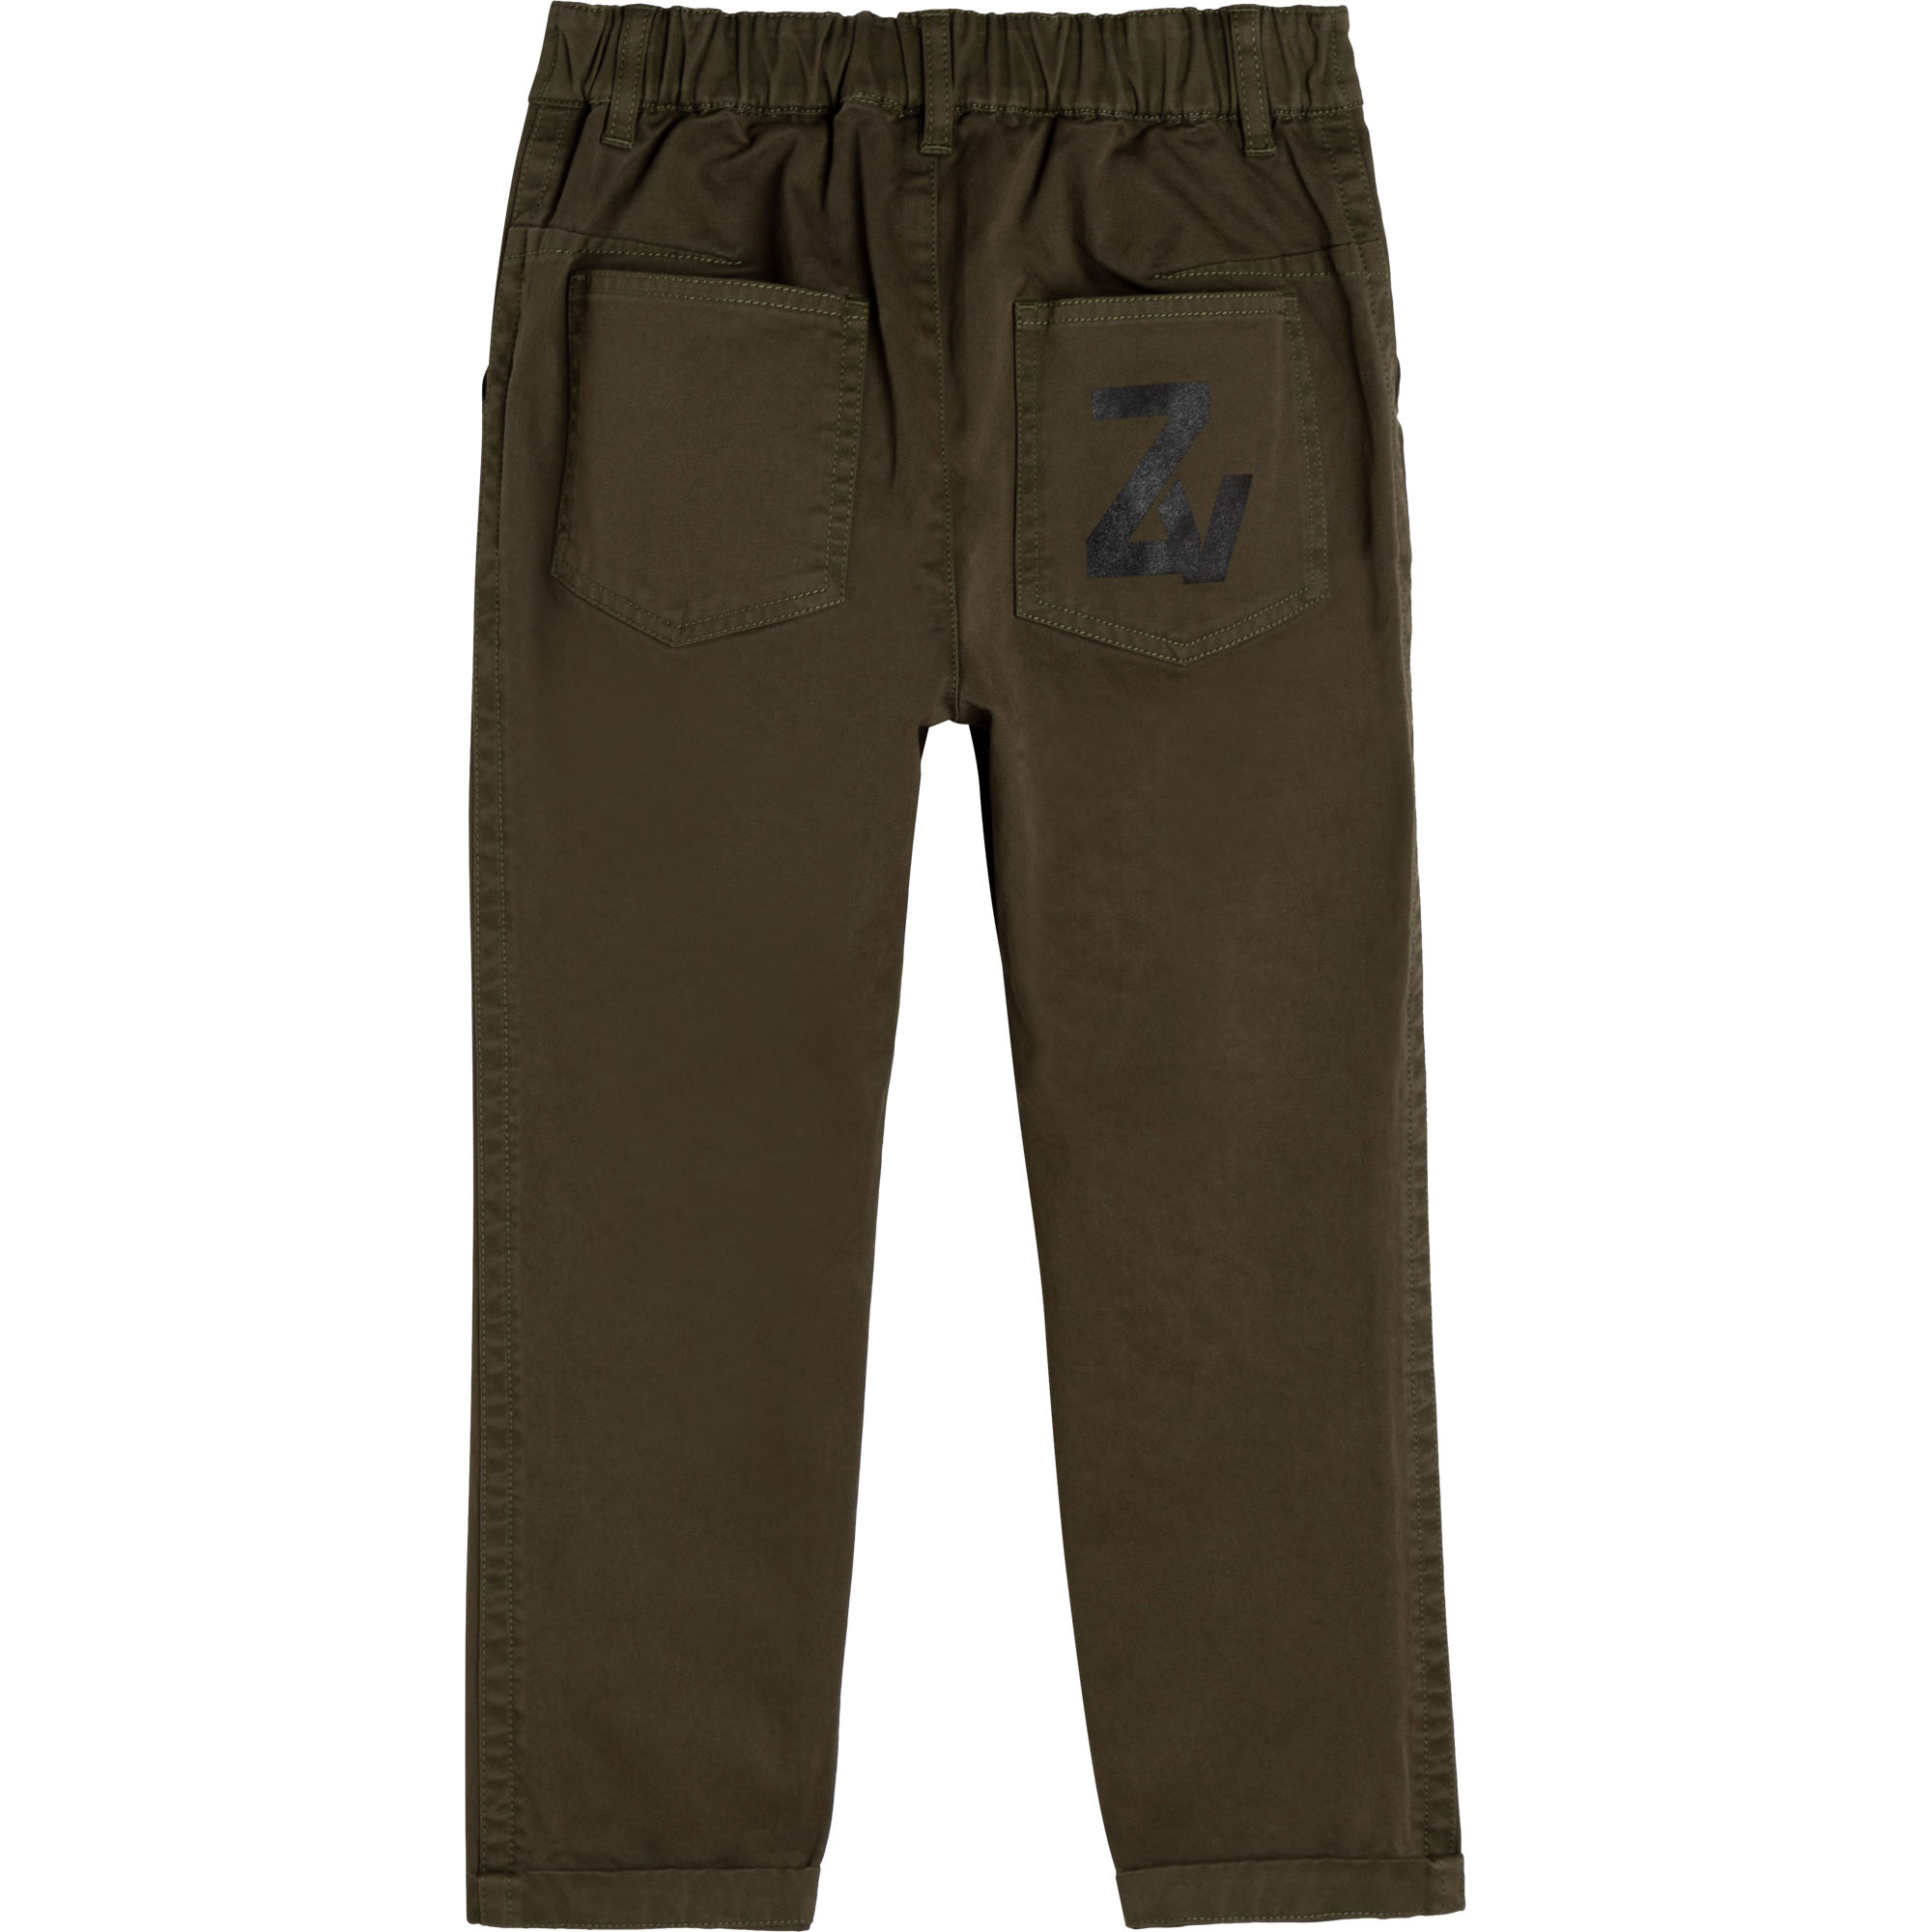 Cotton drill pants ZADIG & VOLTAIRE for BOY